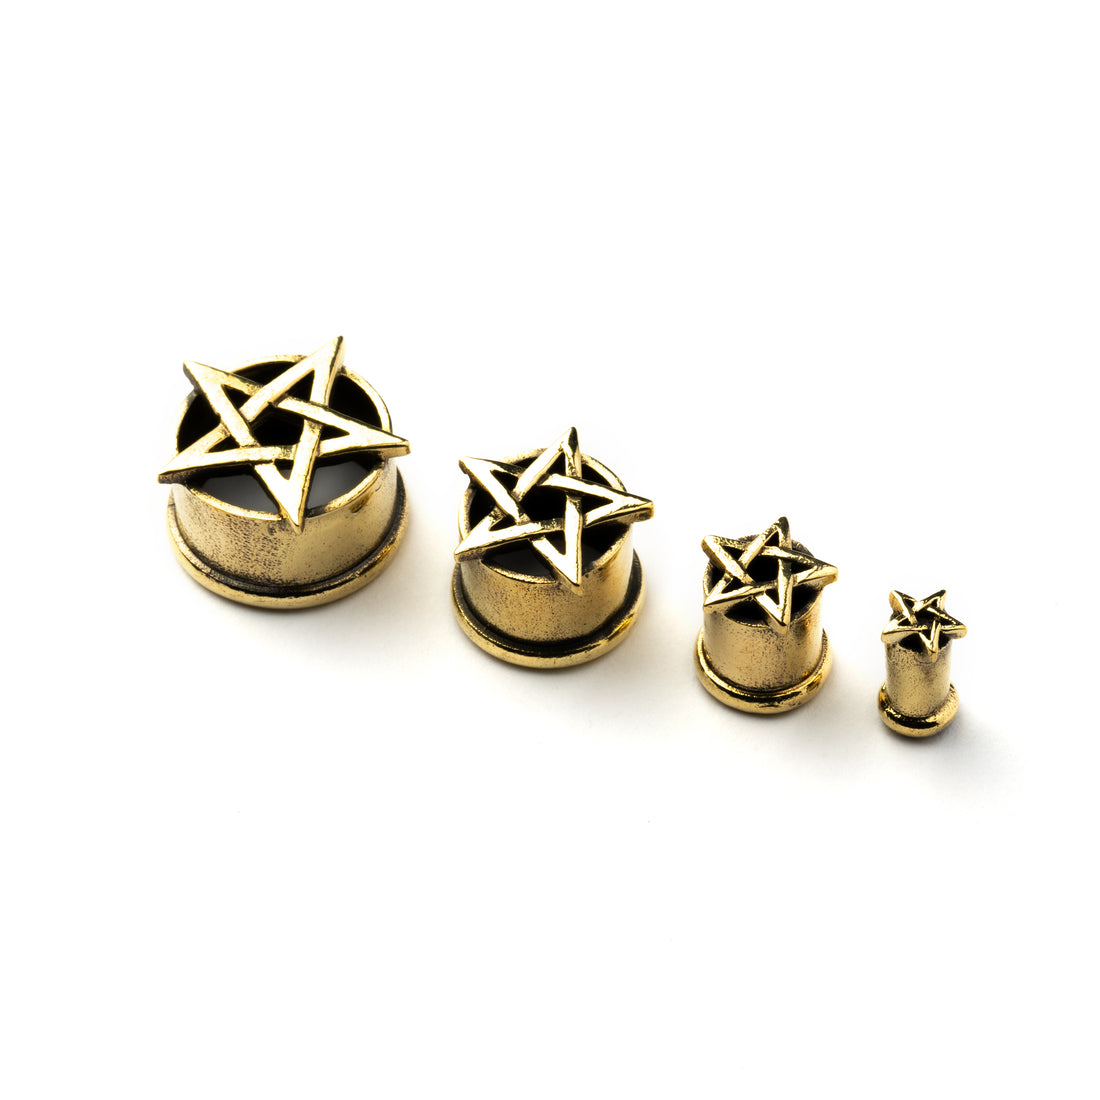 several sizes of Brass Pentagram plugs front and side view